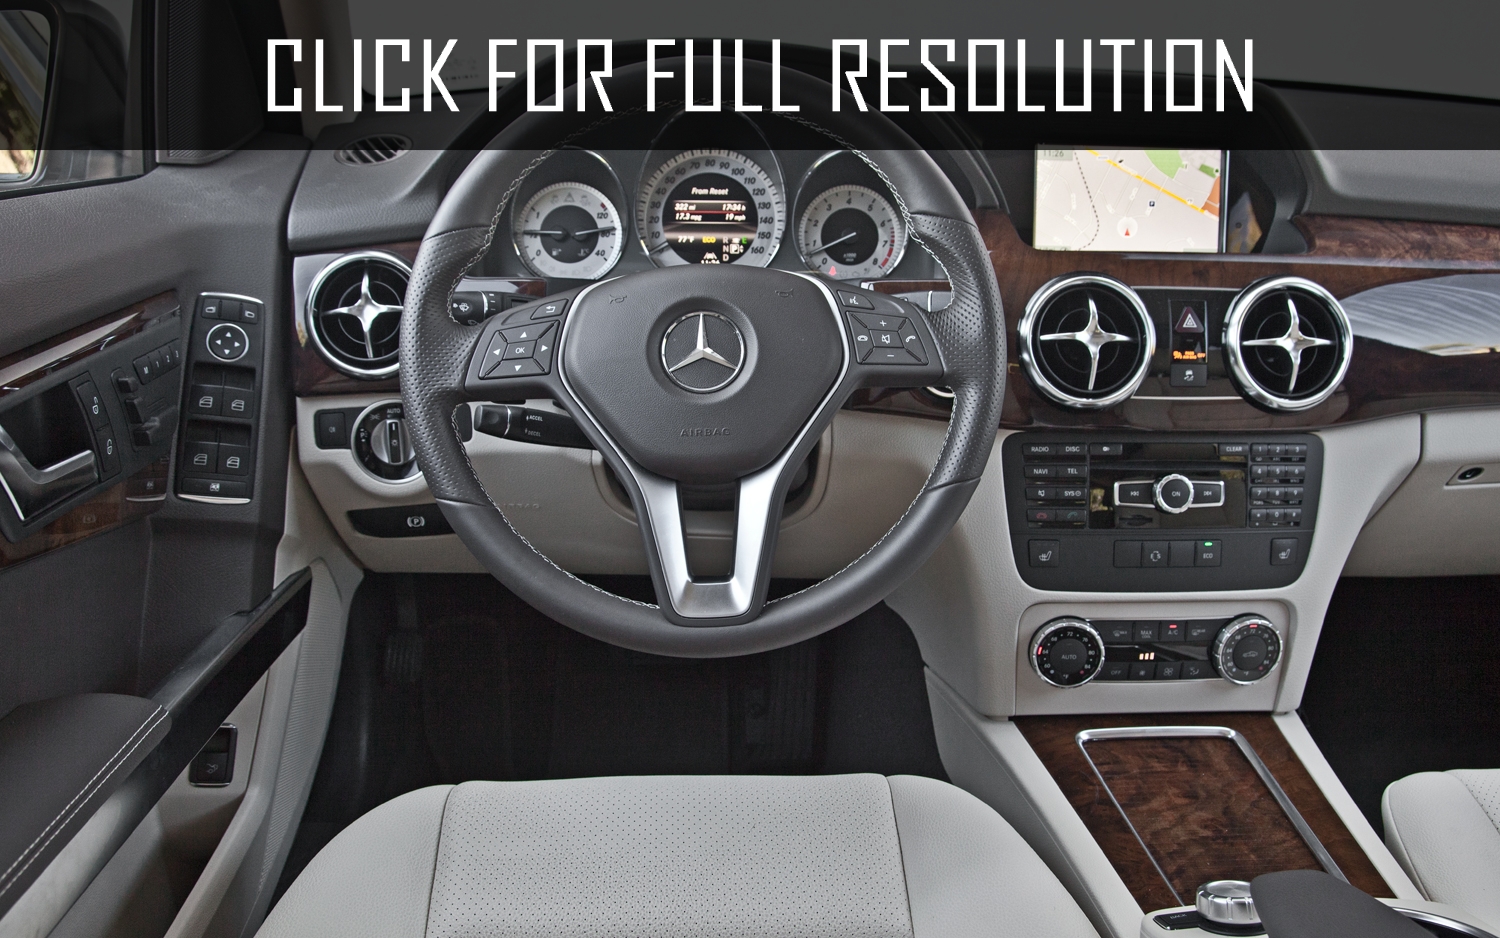 Mercedes Benz Glk 2012 Reviews Prices Ratings With